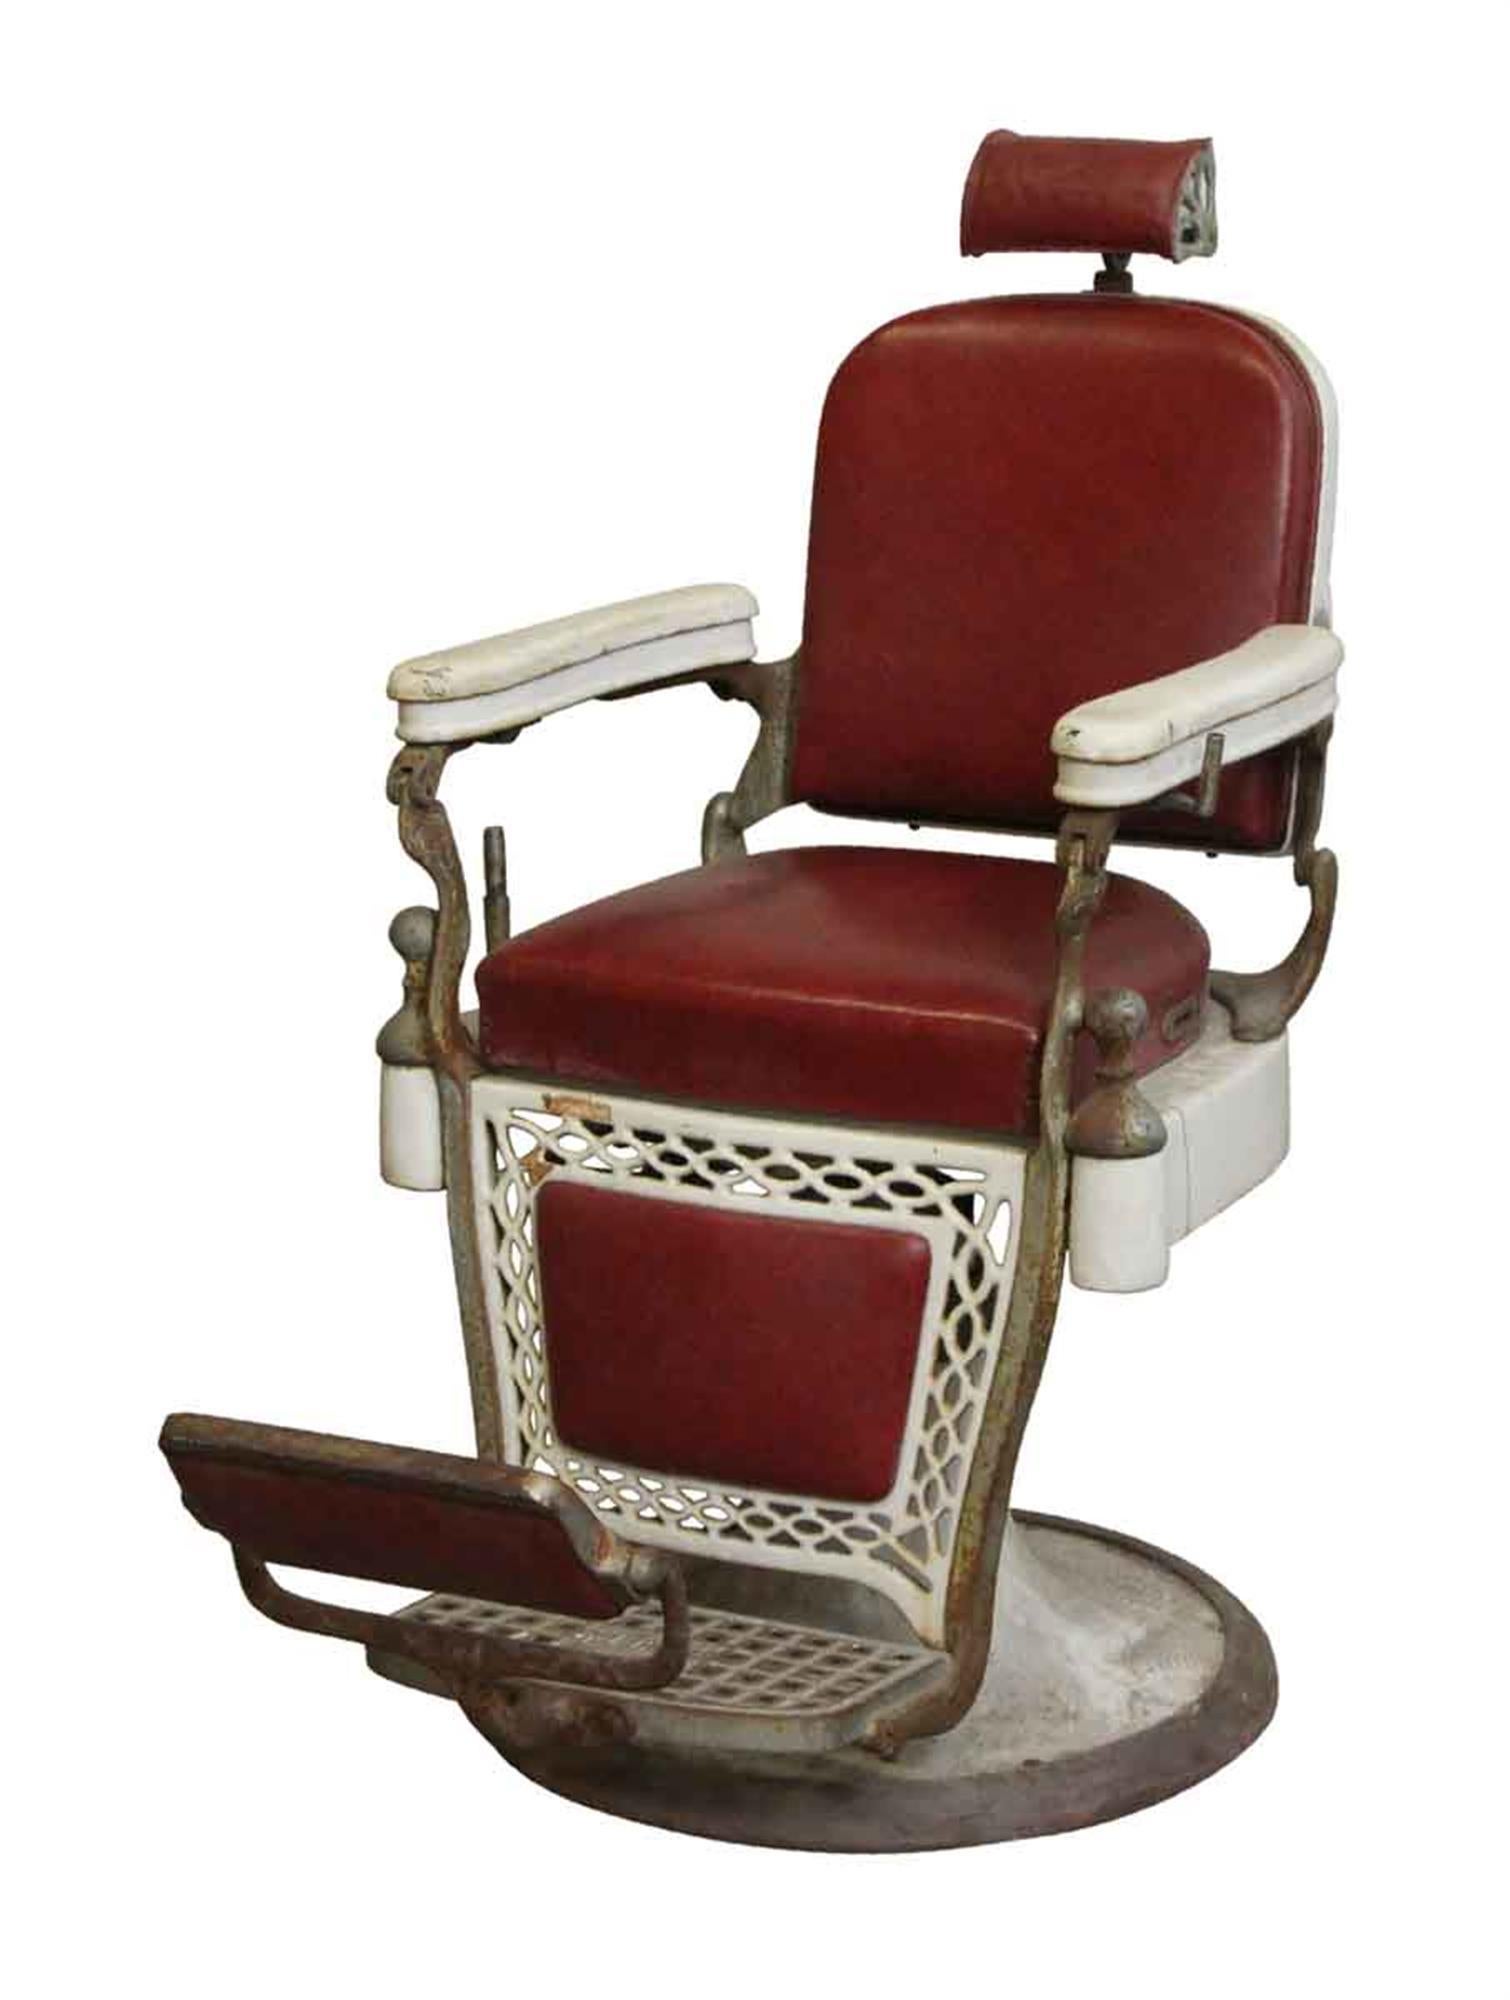 Old 1920s barber chair in restorable condition with porcelain arms and burgundy red upholstery. Made by The Emil J. Paidar Company. Needs some restoration. This can be seen at our 400 Gilligan St location in Scranton, PA.